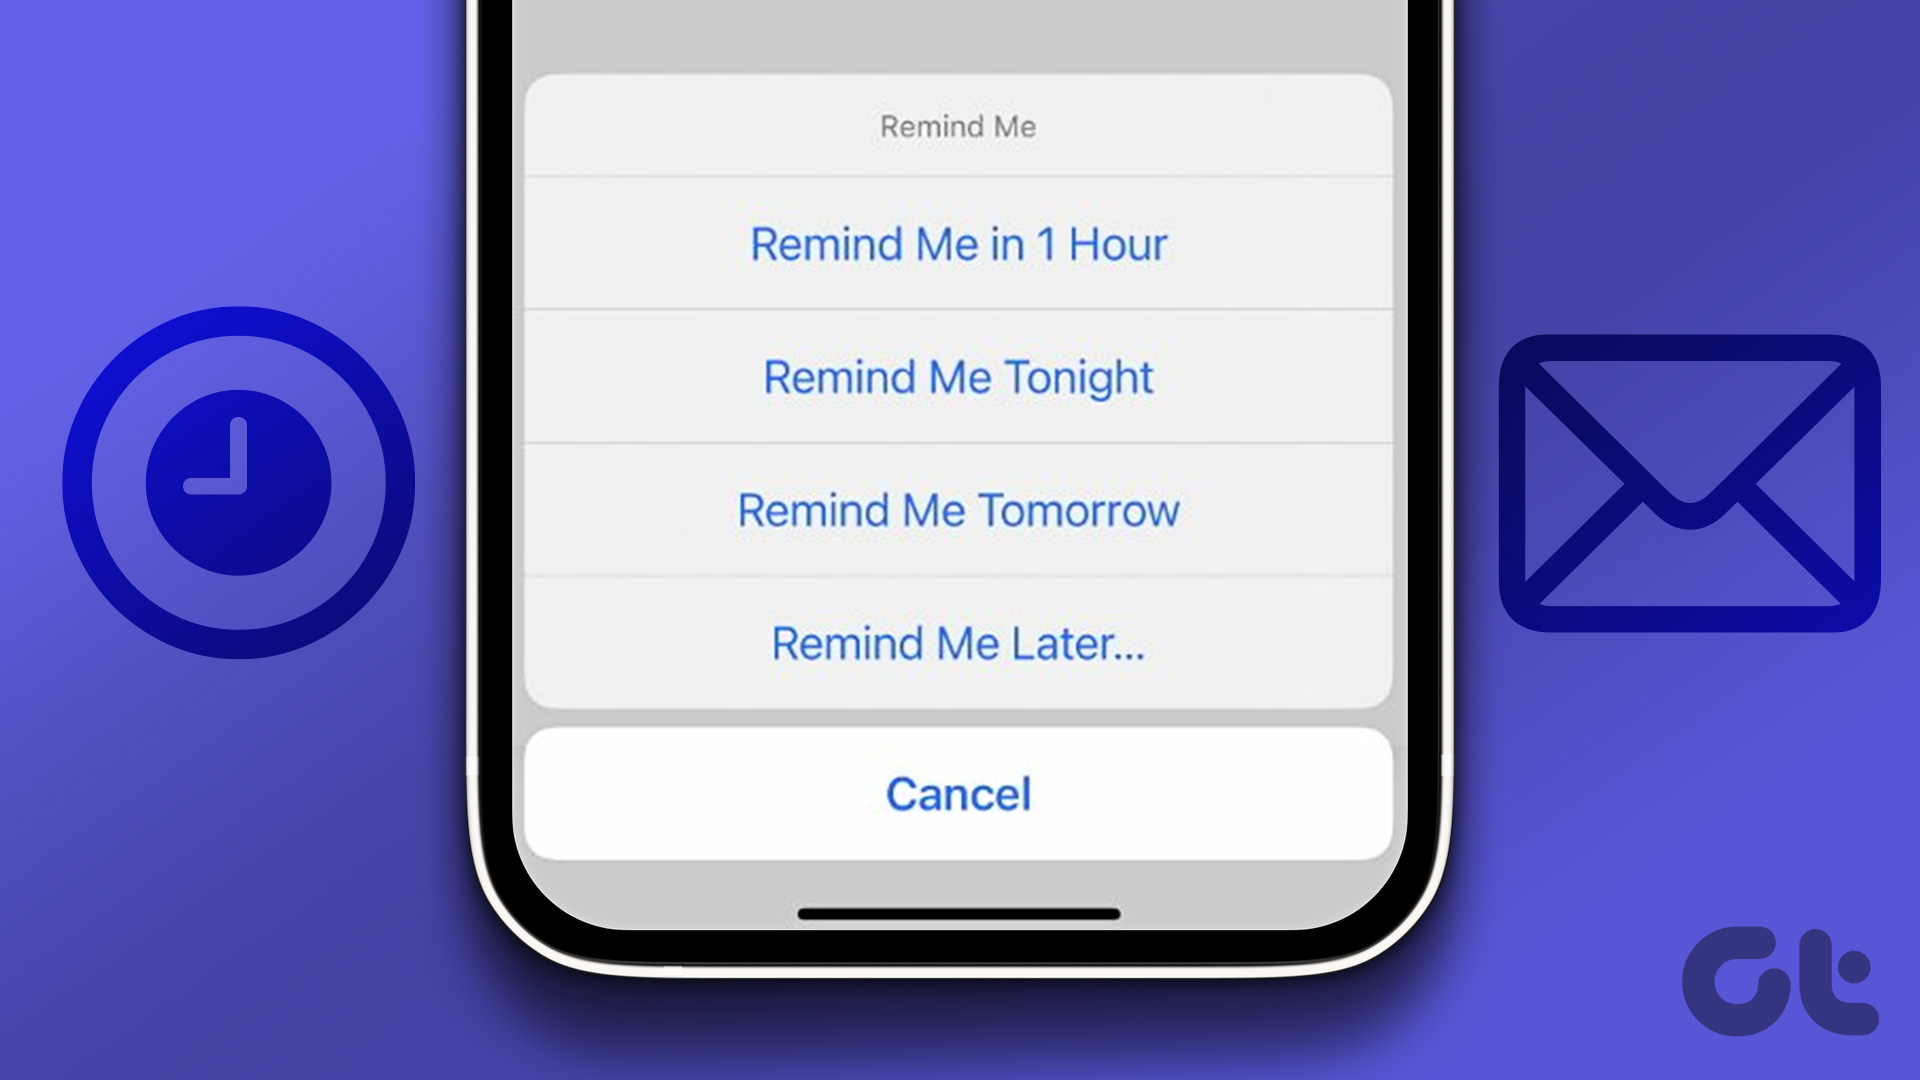 How to Set Email Reminders in Mail App on iPhone